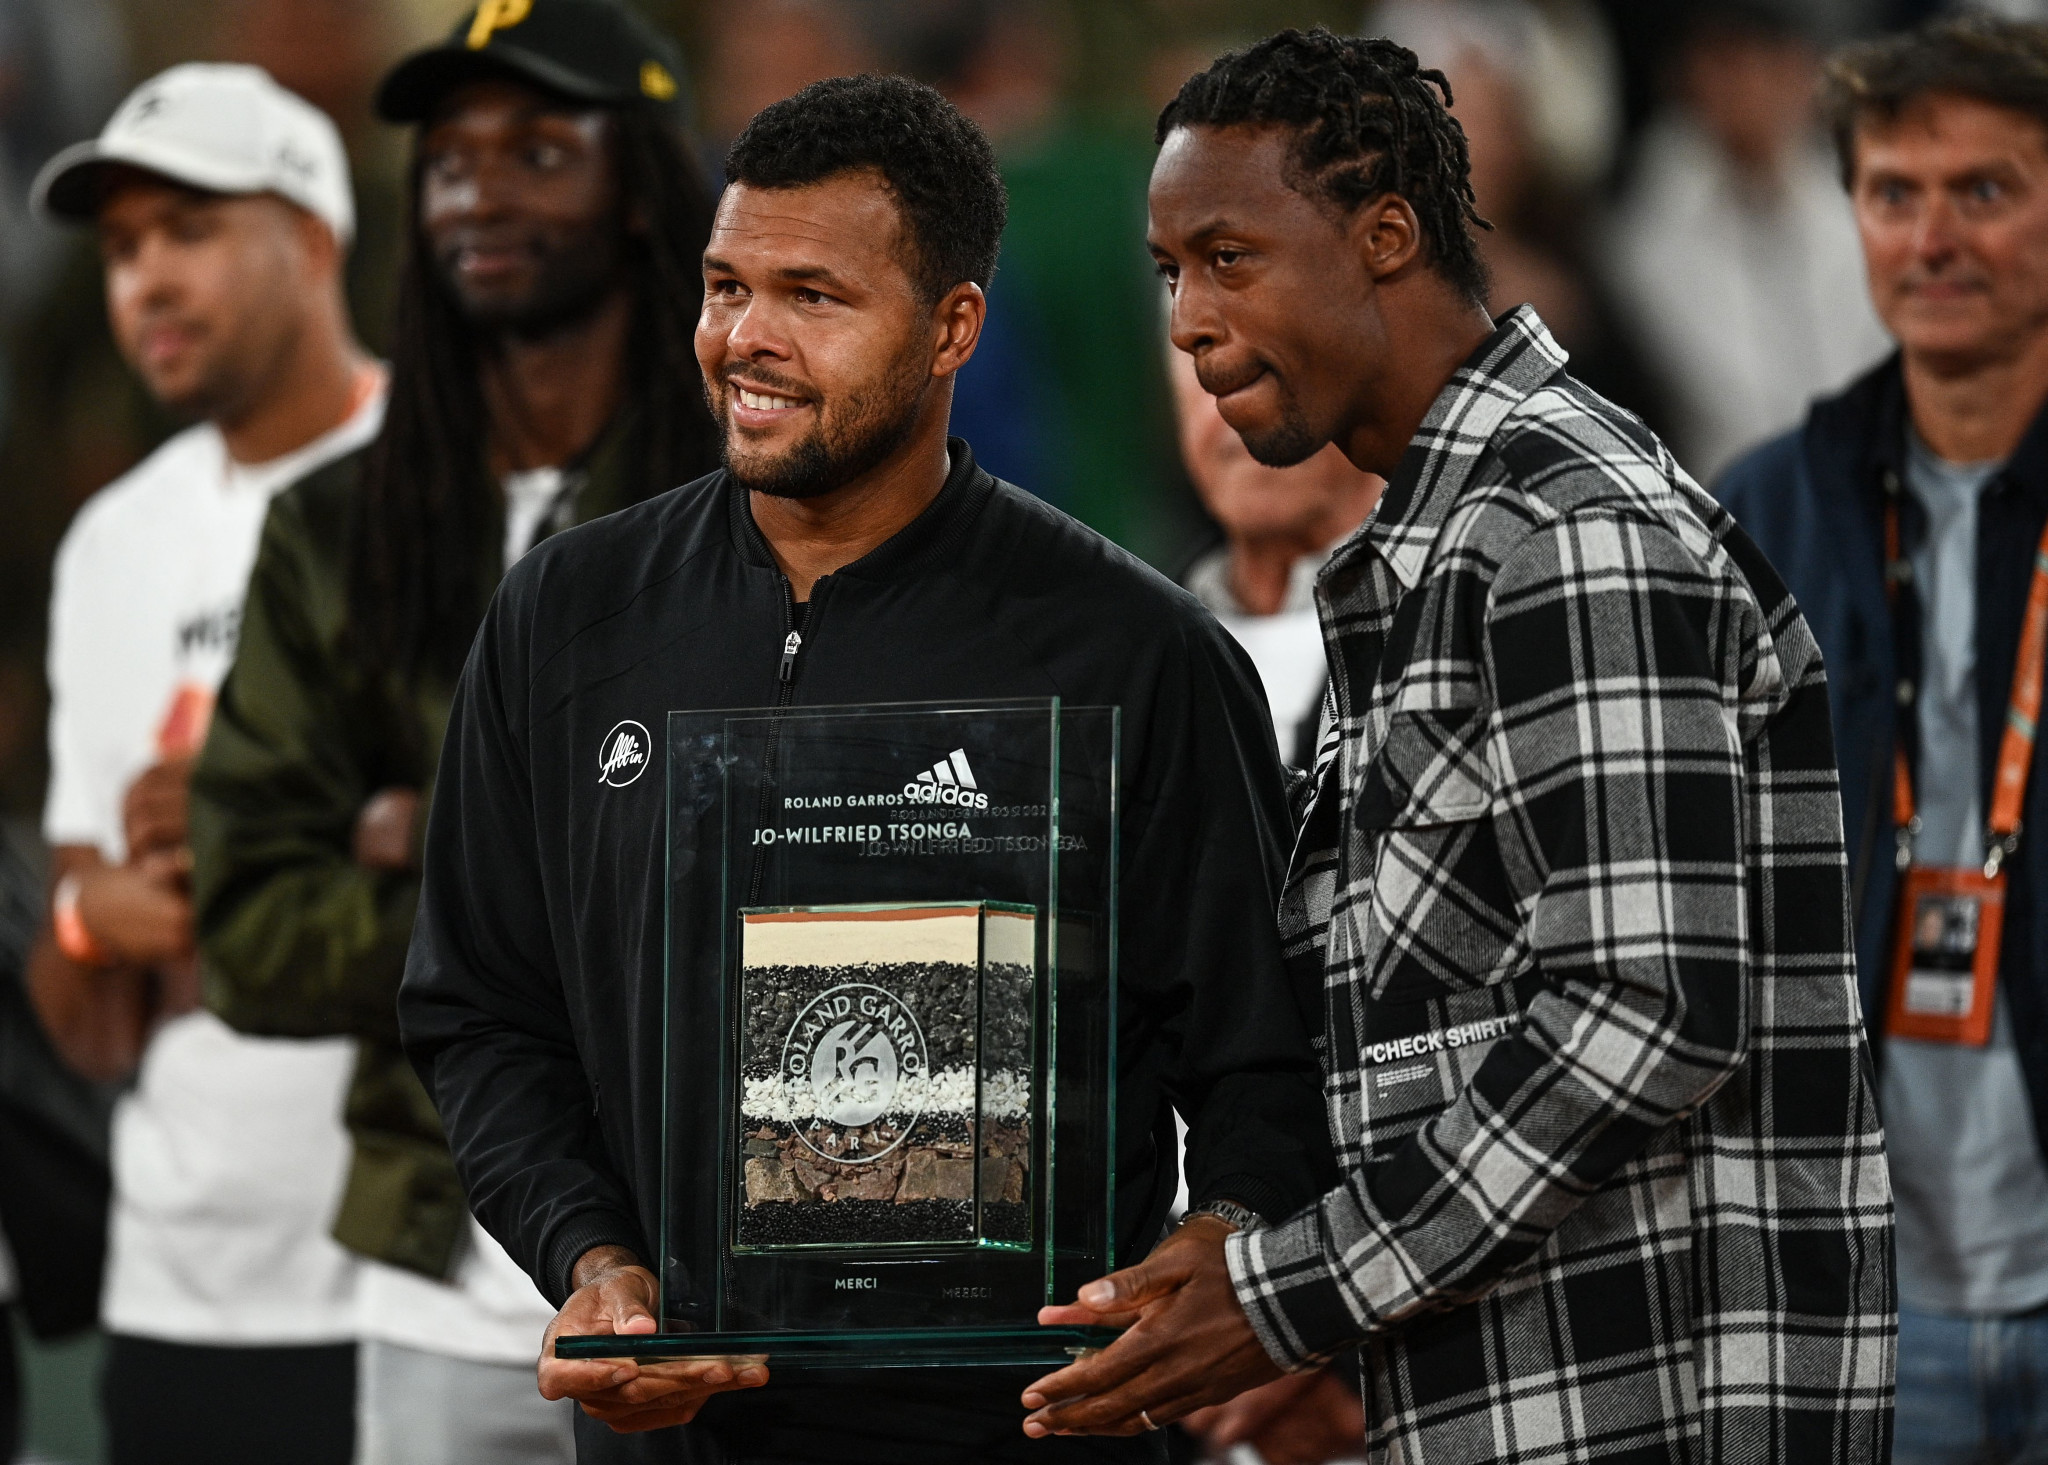 Tsonga loses final match of career as Badosa reaches second round